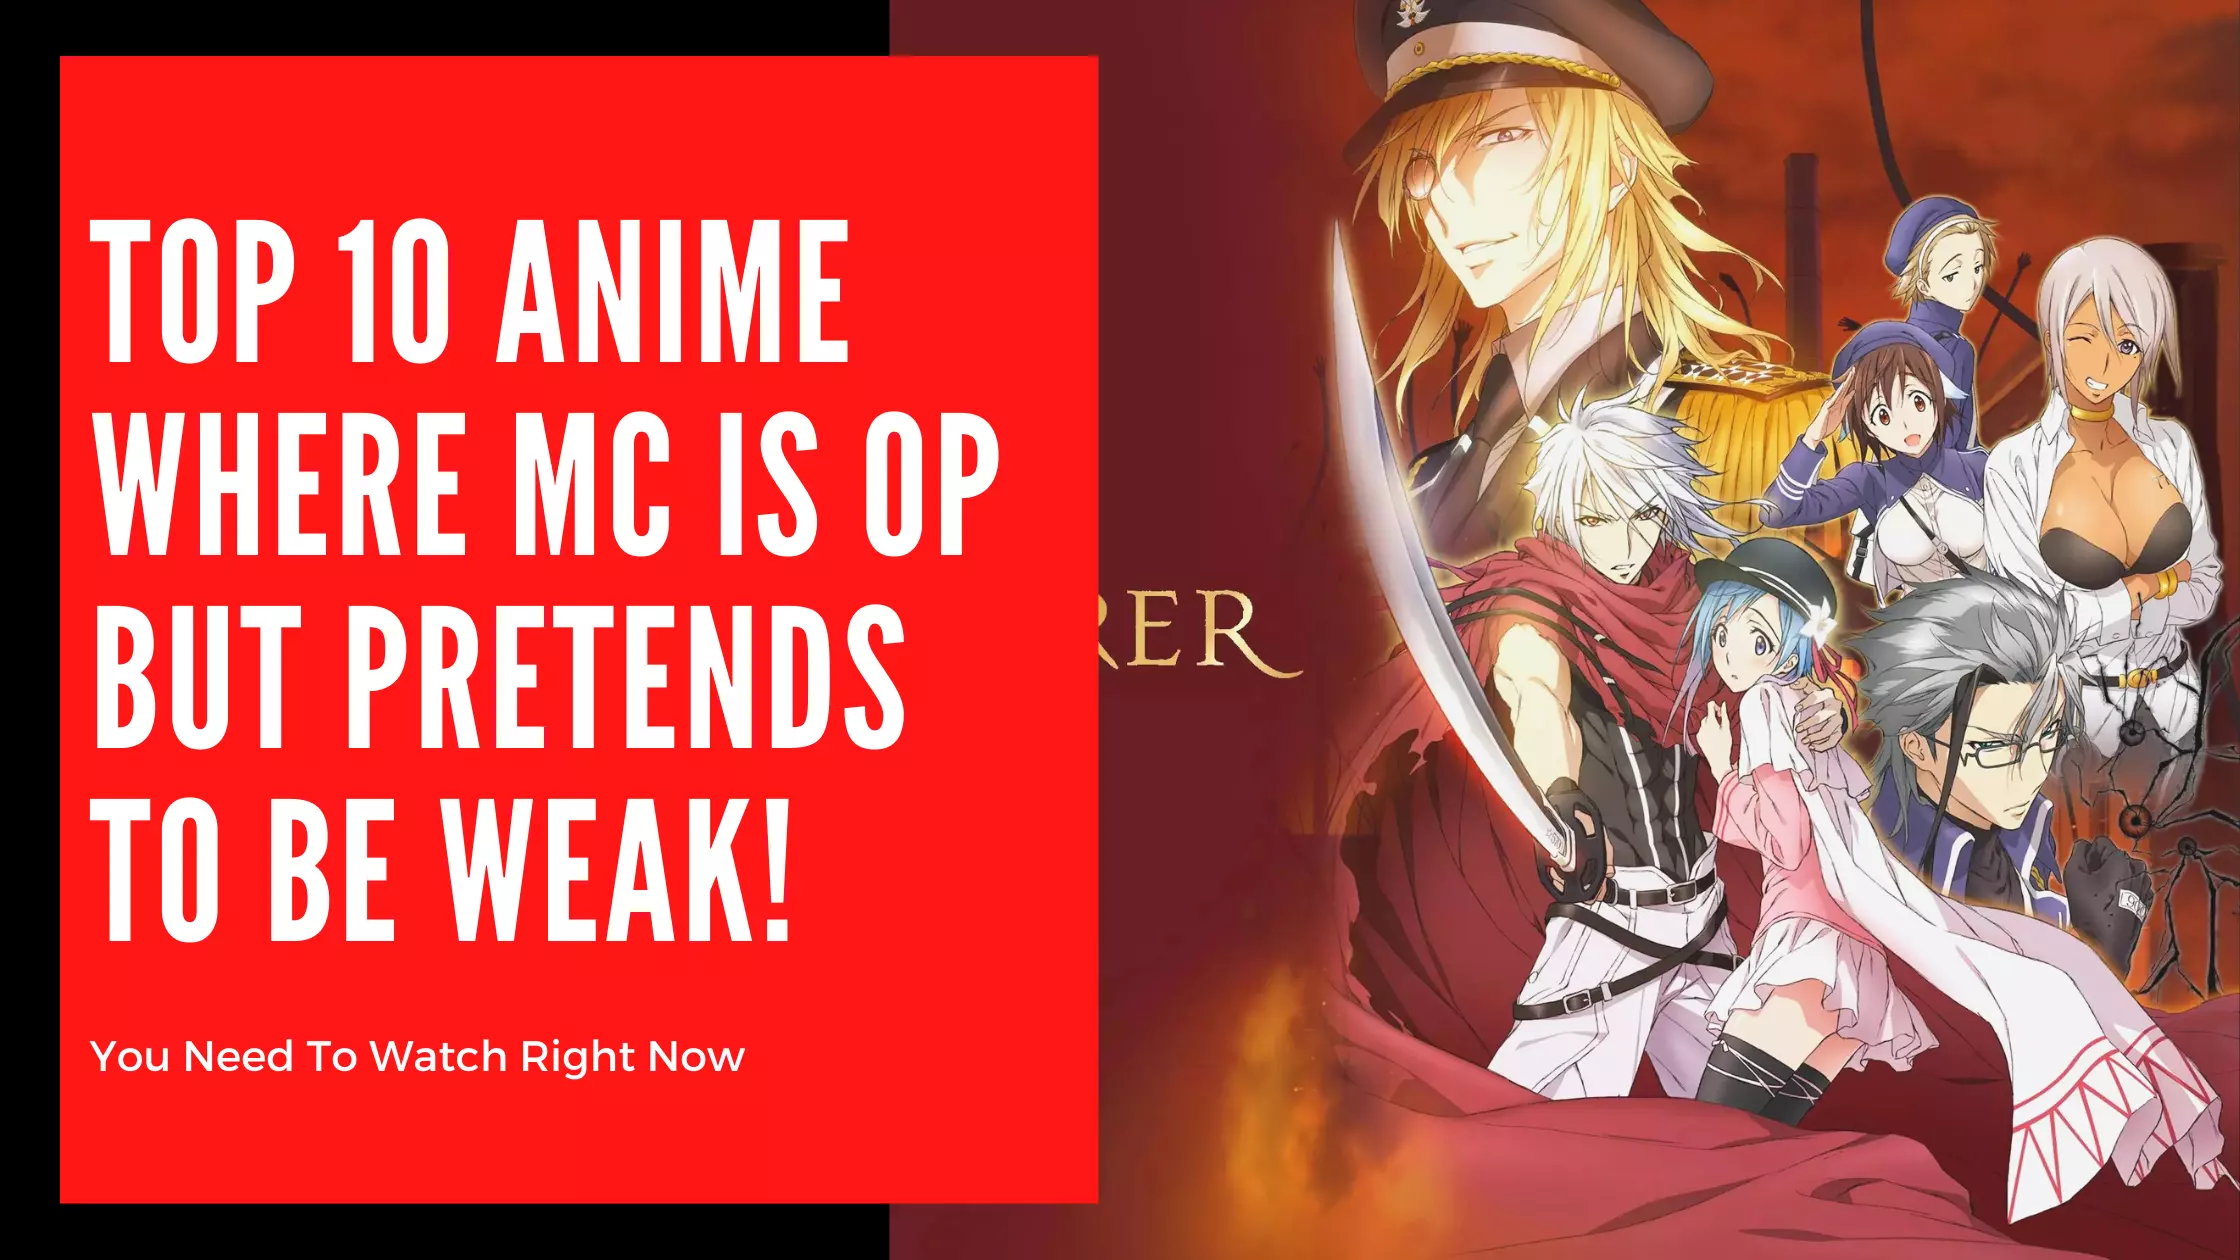 Top 10 Anime Where MC is OP But Pretends To Be Weak! - Anime Mantra